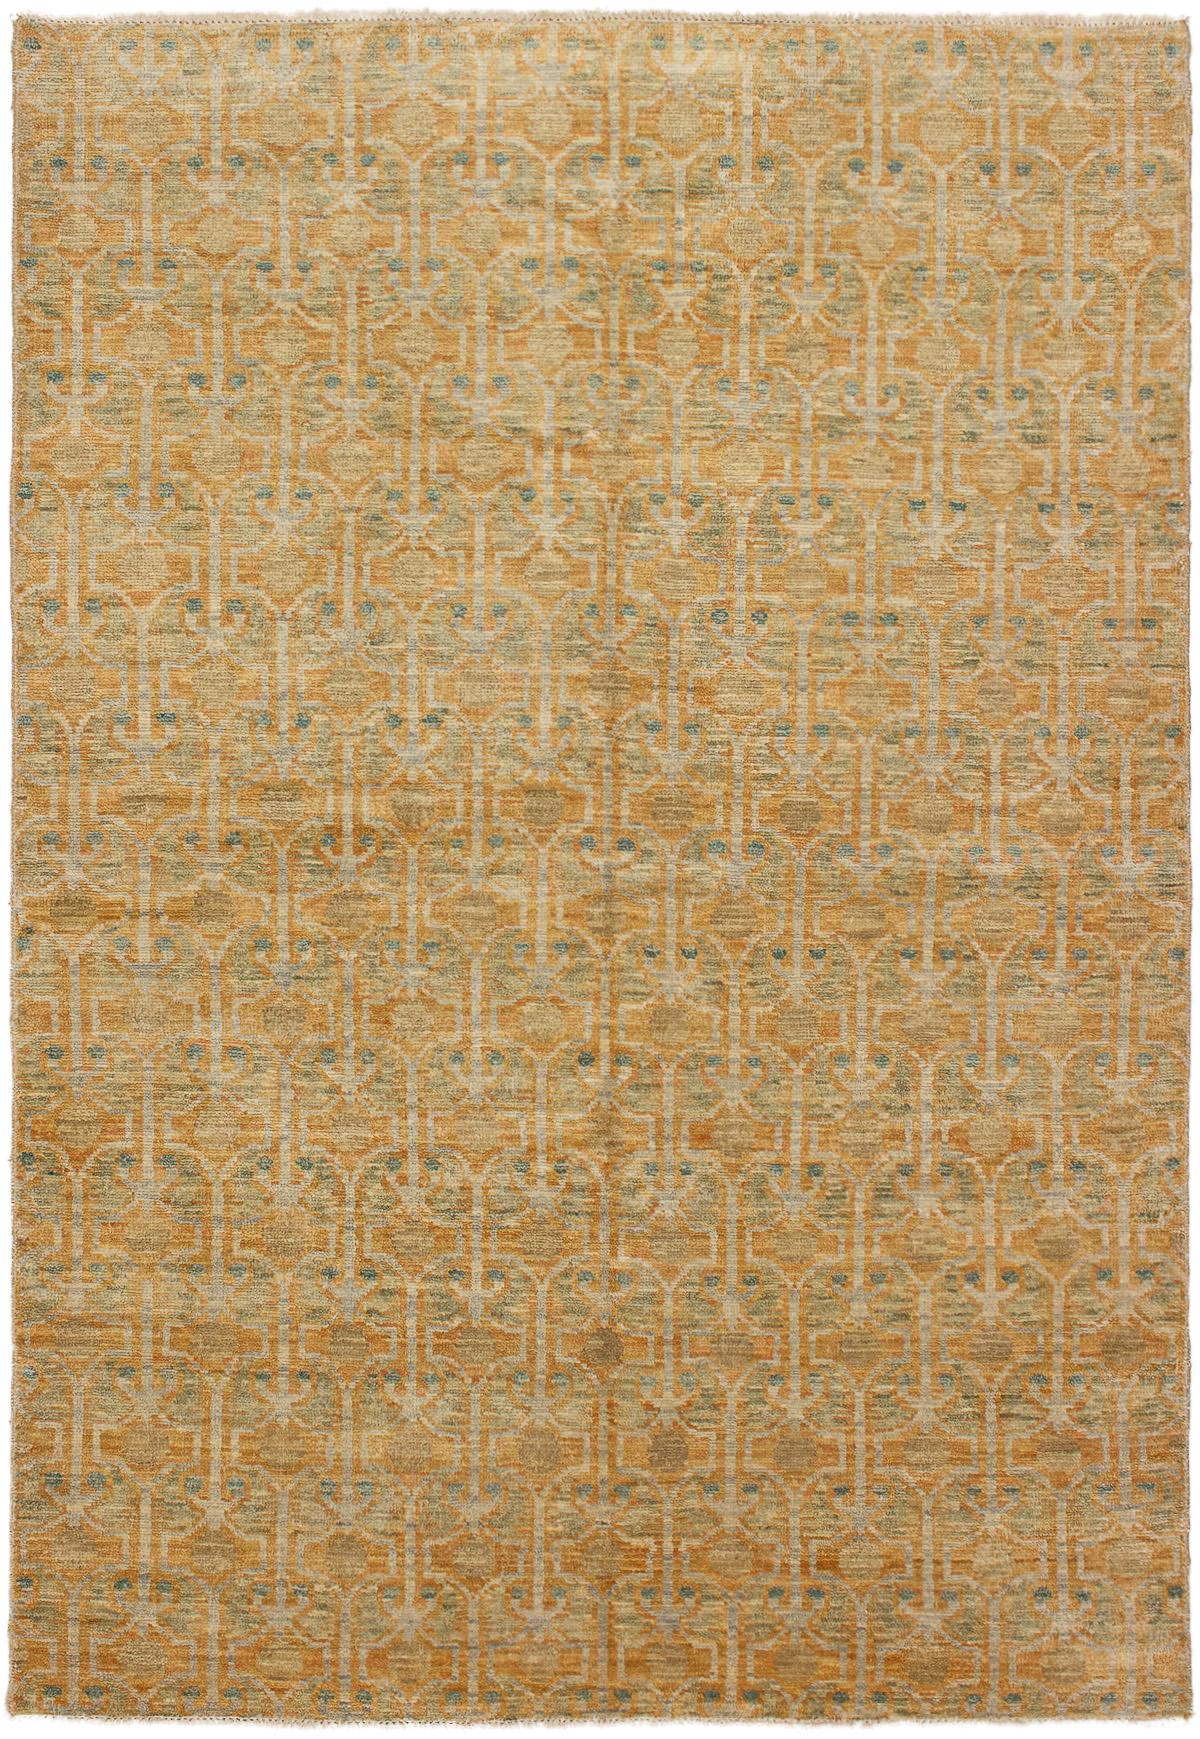 Hand-knotted Shalimar Copper Wool Rug 6'2" x 8'9" Size: 6'2" x 8'9"  